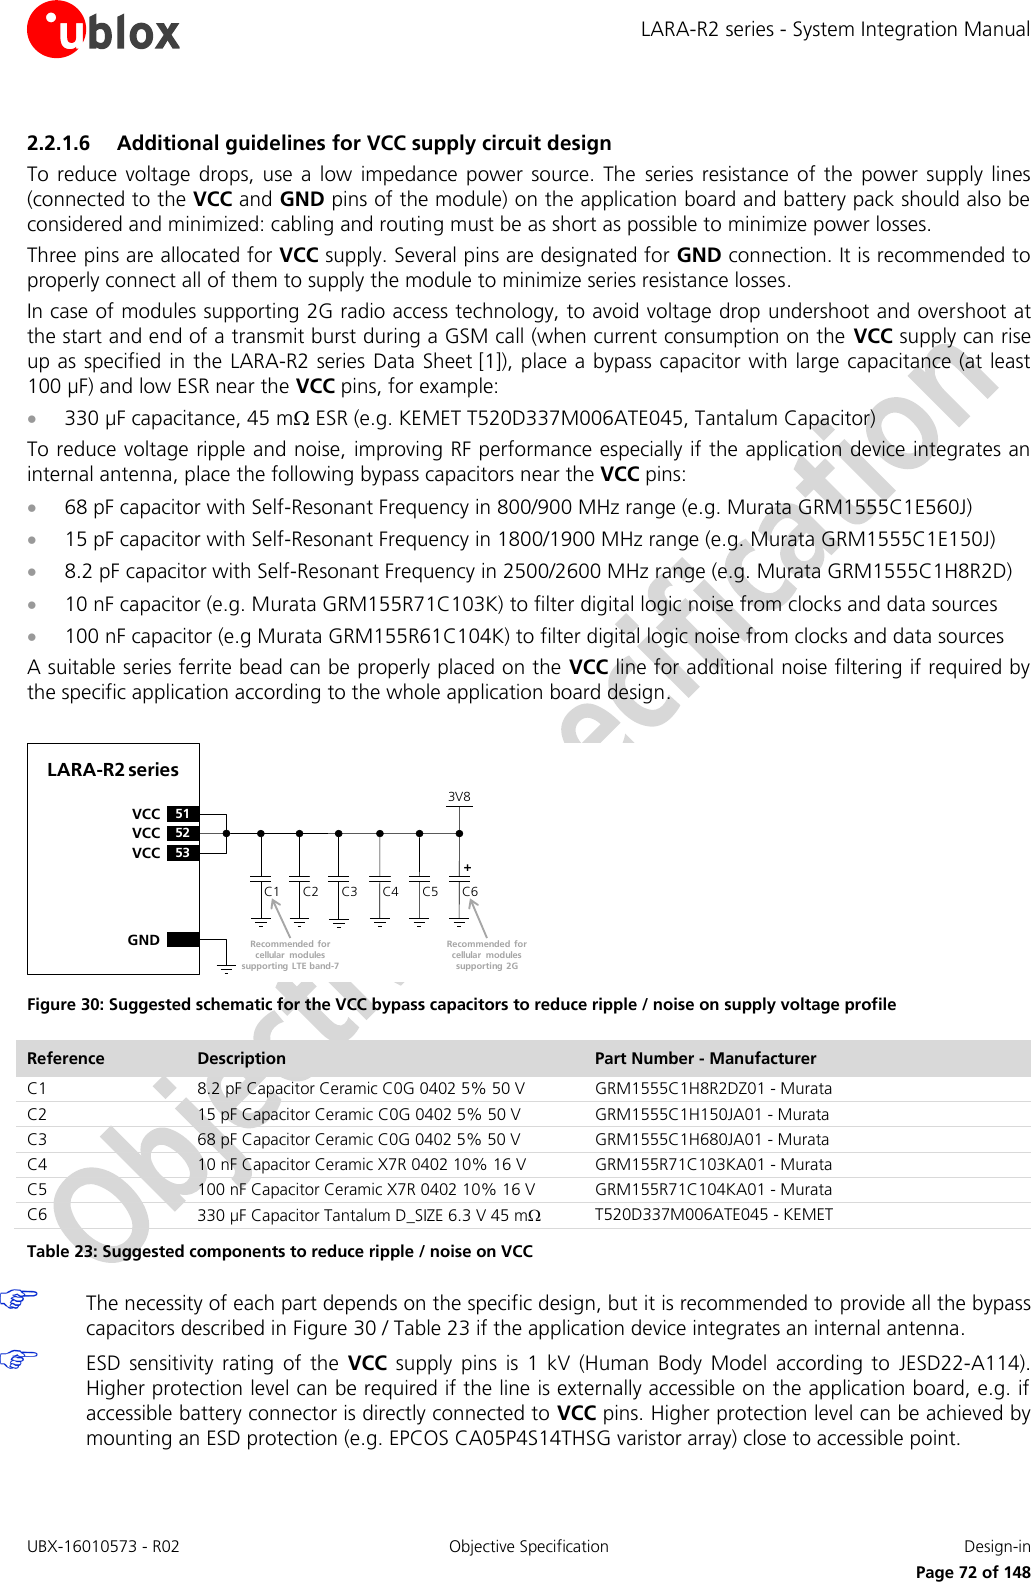 LARA-R2 series - System Integration Manual UBX-16010573 - R02  Objective Specification  Design-in     Page 72 of 148 2.2.1.6 Additional guidelines for VCC supply circuit design To reduce voltage  drops,  use  a  low  impedance  power  source.  The  series resistance  of  the  power  supply  lines (connected to the VCC and GND pins of the module) on the application board and battery pack should also be considered and minimized: cabling and routing must be as short as possible to minimize power losses. Three pins are allocated for VCC supply. Several pins are designated for GND connection. It is recommended to properly connect all of them to supply the module to minimize series resistance losses. In case of modules supporting 2G radio access technology, to avoid voltage drop undershoot and overshoot at the start and end of a transmit burst during a GSM call (when current consumption on the  VCC supply can rise up as specified in the LARA-R2 series Data Sheet [1]), place a bypass capacitor with large capacitance (at least 100 µF) and low ESR near the VCC pins, for example:  330 µF capacitance, 45 m ESR (e.g. KEMET T520D337M006ATE045, Tantalum Capacitor) To reduce voltage ripple and noise, improving RF performance especially if the application device integrates an internal antenna, place the following bypass capacitors near the VCC pins:  68 pF capacitor with Self-Resonant Frequency in 800/900 MHz range (e.g. Murata GRM1555C1E560J)   15 pF capacitor with Self-Resonant Frequency in 1800/1900 MHz range (e.g. Murata GRM1555C1E150J)   8.2 pF capacitor with Self-Resonant Frequency in 2500/2600 MHz range (e.g. Murata GRM1555C1H8R2D)  10 nF capacitor (e.g. Murata GRM155R71C103K) to filter digital logic noise from clocks and data sources  100 nF capacitor (e.g Murata GRM155R61C104K) to filter digital logic noise from clocks and data sources A suitable series ferrite bead can be properly placed on the VCC line for additional noise filtering if required by the specific application according to the whole application board design.   C2GNDC3 C4LARA-R2 series52VCC53VCC51VCCC1 C63V8+Recommended for cellular  modules supporting 2GC5Recommended for cellular  modules supporting LTE band-7 Figure 30: Suggested schematic for the VCC bypass capacitors to reduce ripple / noise on supply voltage profile  Reference Description Part Number - Manufacturer C1 8.2 pF Capacitor Ceramic C0G 0402 5% 50 V GRM1555C1H8R2DZ01 - Murata C2 15 pF Capacitor Ceramic C0G 0402 5% 50 V GRM1555C1H150JA01 - Murata C3 68 pF Capacitor Ceramic C0G 0402 5% 50 V GRM1555C1H680JA01 - Murata C4 10 nF Capacitor Ceramic X7R 0402 10% 16 V GRM155R71C103KA01 - Murata C5 100 nF Capacitor Ceramic X7R 0402 10% 16 V GRM155R71C104KA01 - Murata C6 330 µF Capacitor Tantalum D_SIZE 6.3 V 45 m T520D337M006ATE045 - KEMET Table 23: Suggested components to reduce ripple / noise on VCC   The necessity of each part depends on the specific design, but it is recommended to provide all the bypass capacitors described in Figure 30 / Table 23 if the application device integrates an internal antenna.   ESD  sensitivity  rating  of  the  VCC  supply  pins  is  1  kV  (Human  Body  Model  according  to  JESD22-A114). Higher protection level can be required if the line is externally accessible on the application board, e.g. if accessible battery connector is directly connected to VCC pins. Higher protection level can be achieved by mounting an ESD protection (e.g. EPCOS CA05P4S14THSG varistor array) close to accessible point.  